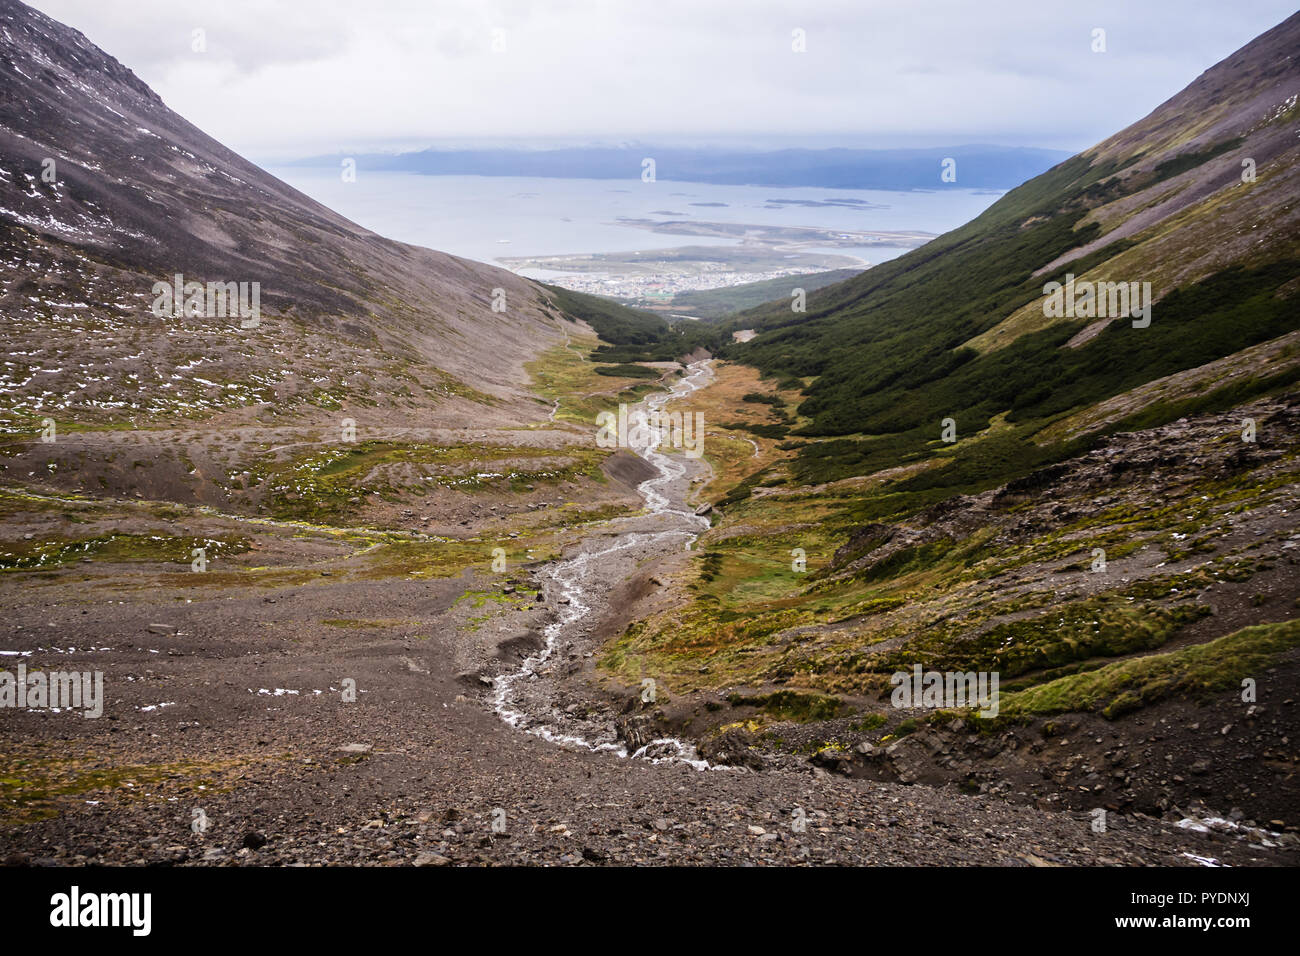 Valley of the Martial glacier and his river with Ushuaia and the Beagle channel in the back Stock Photo